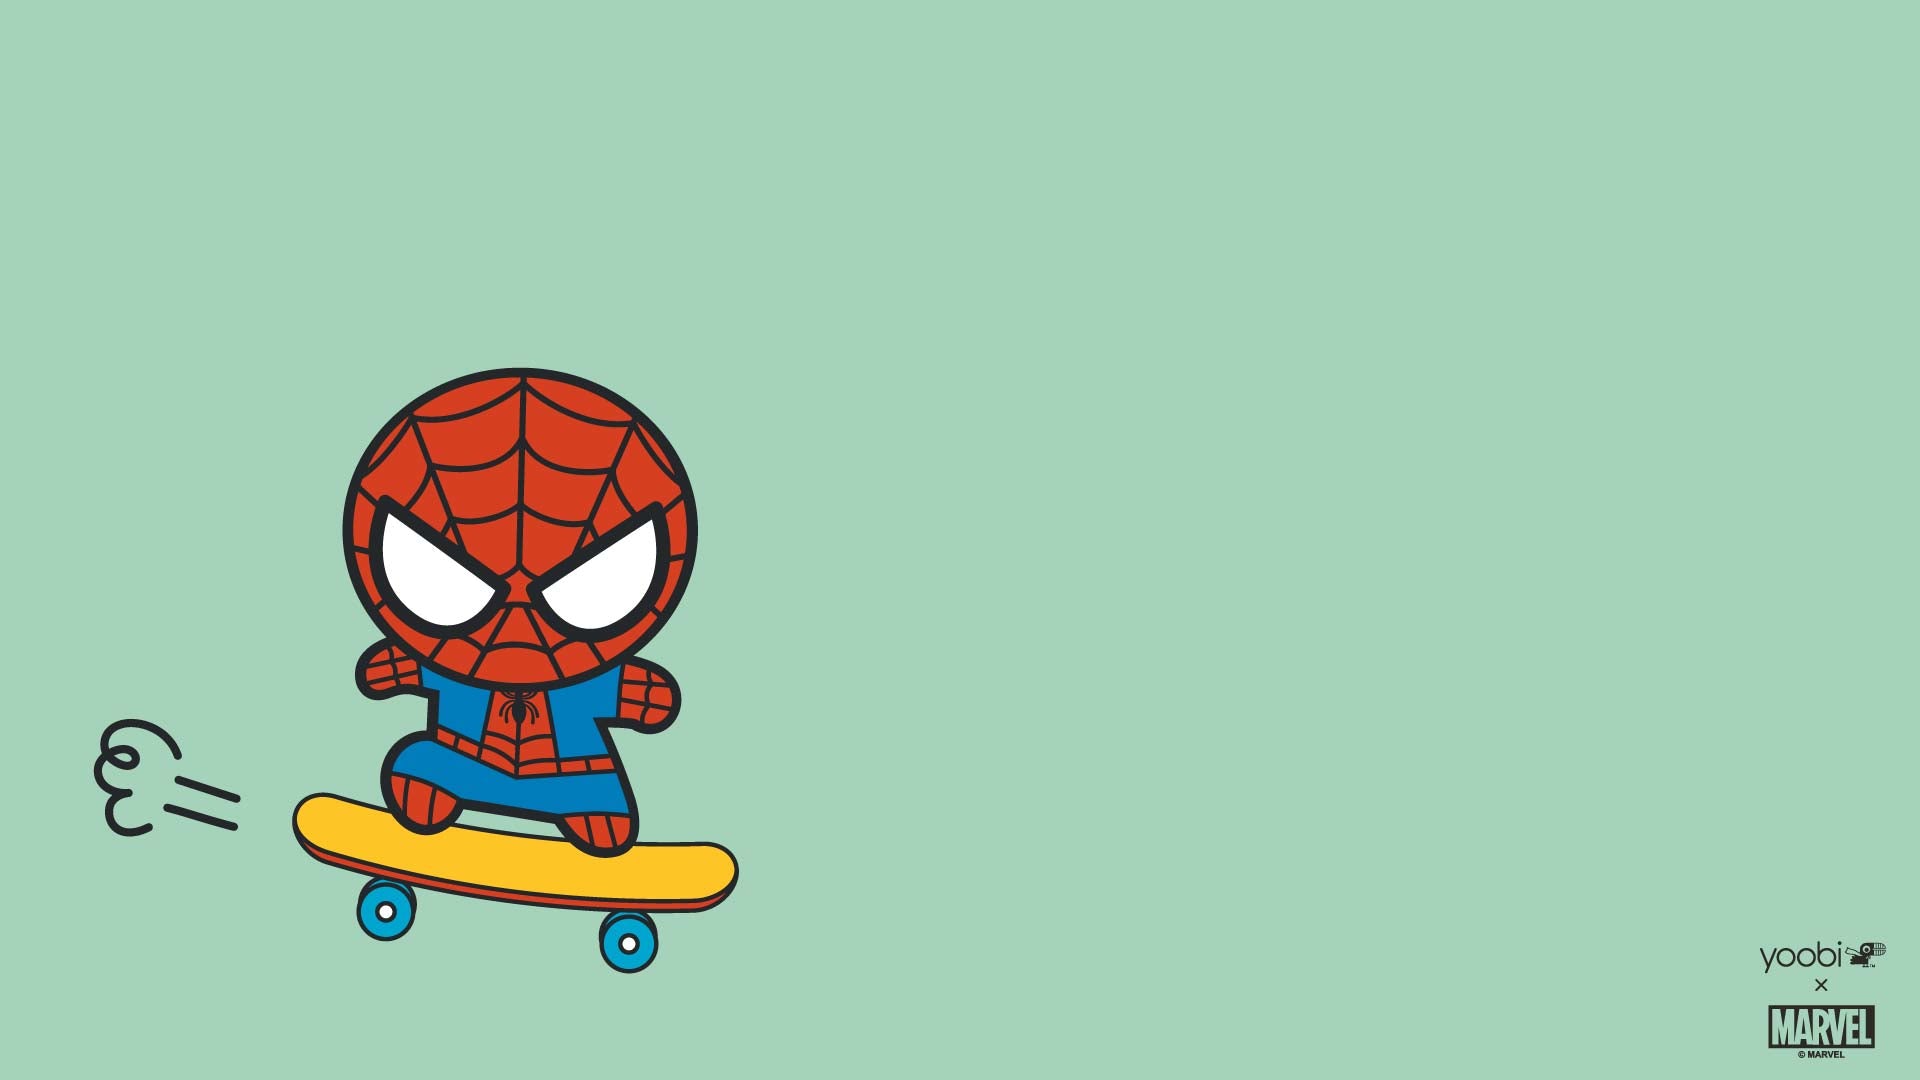 Spiderman wallpaper 1920x1080 for android 1920x1080 - Marvel